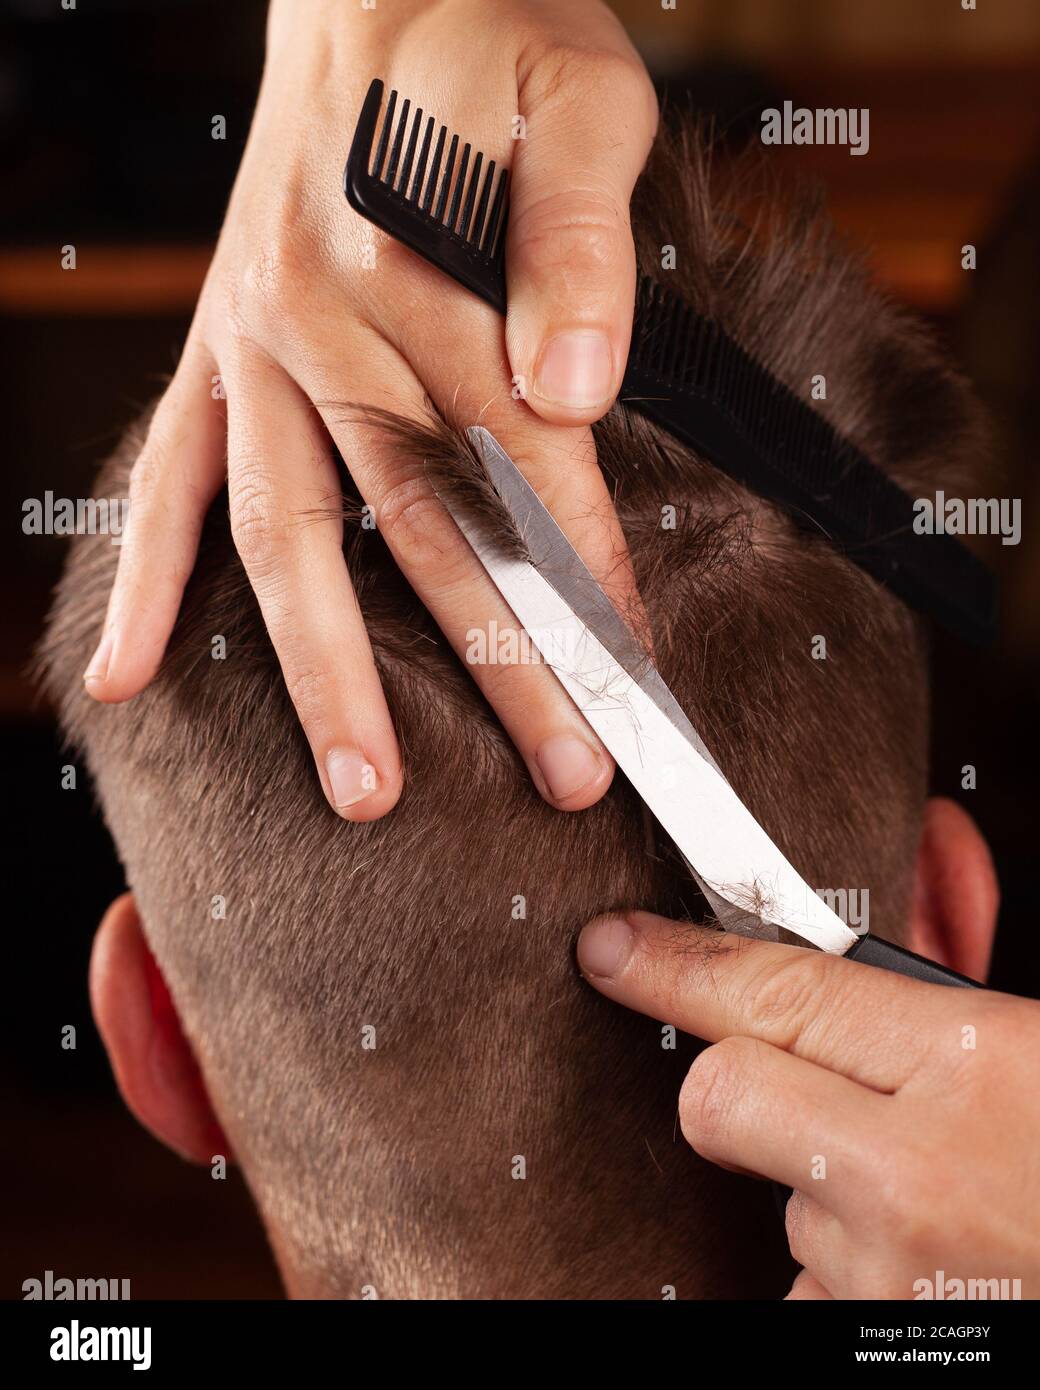 men's haircut. hair cutting with scissors. Creating a stylish men's haircut in a hairdresser close-up. Stock Photo